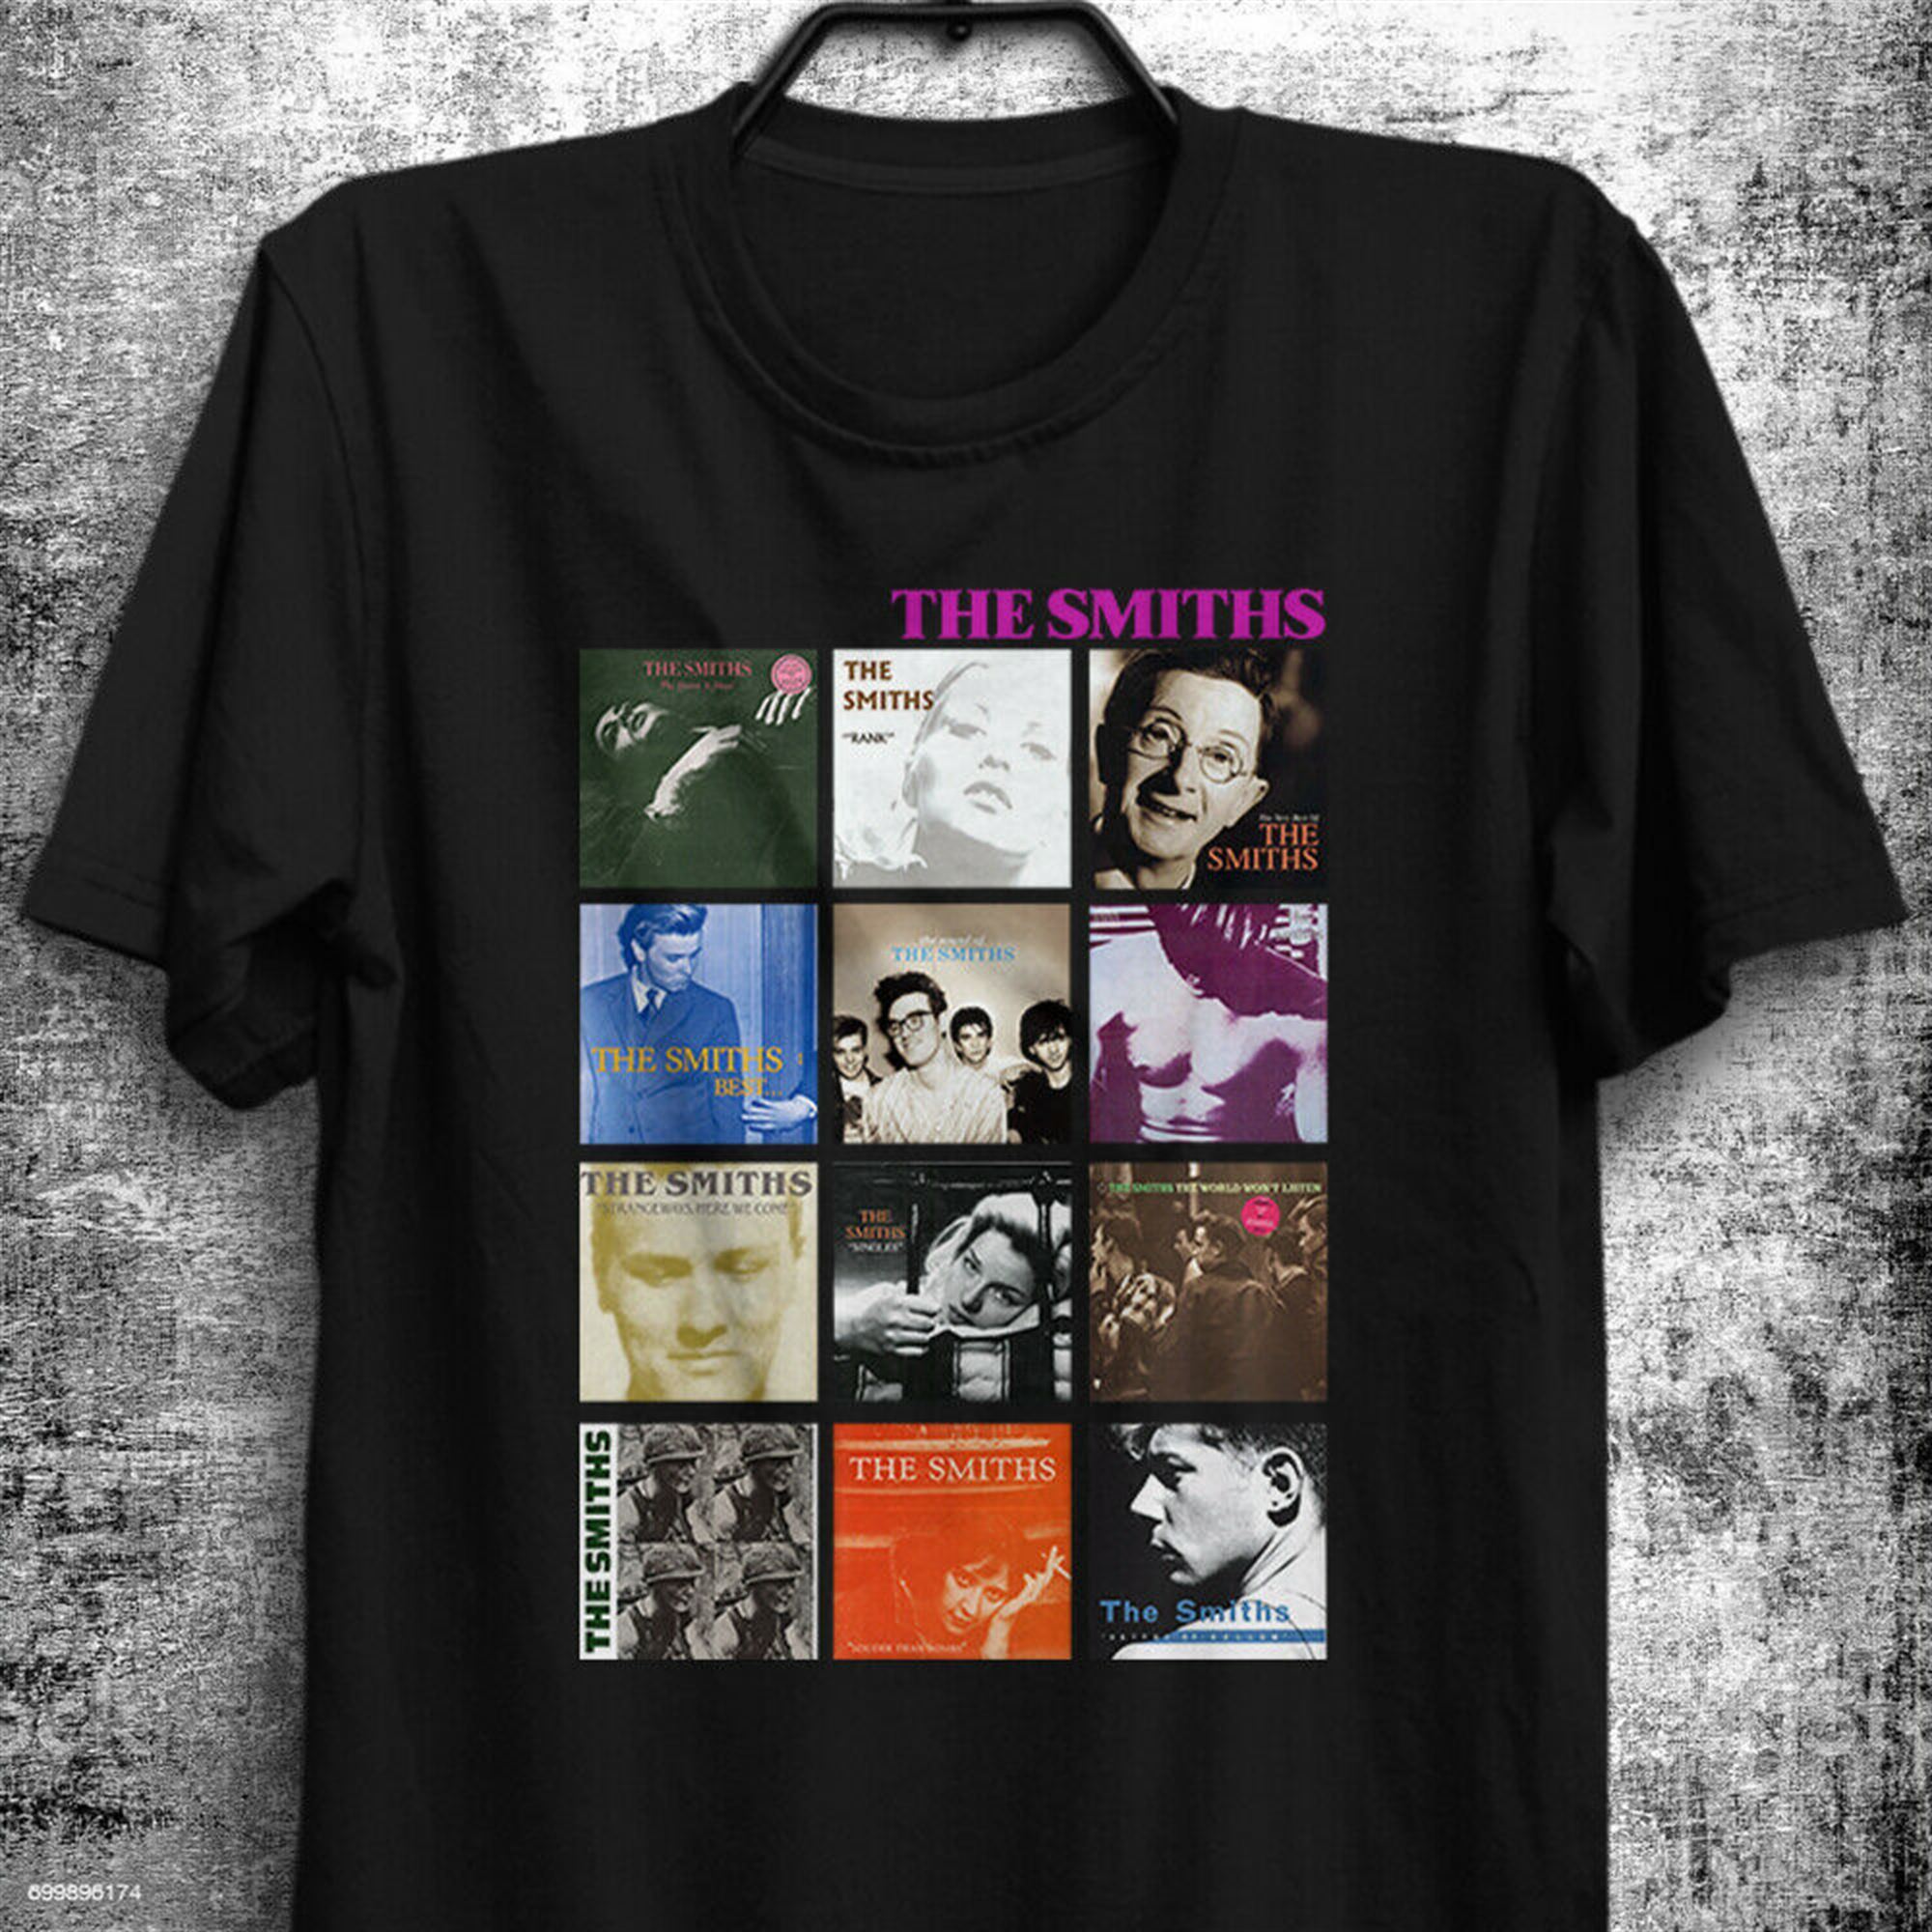 The Best Of The Smiths English Rock Band Morrissey Album Collections T ...